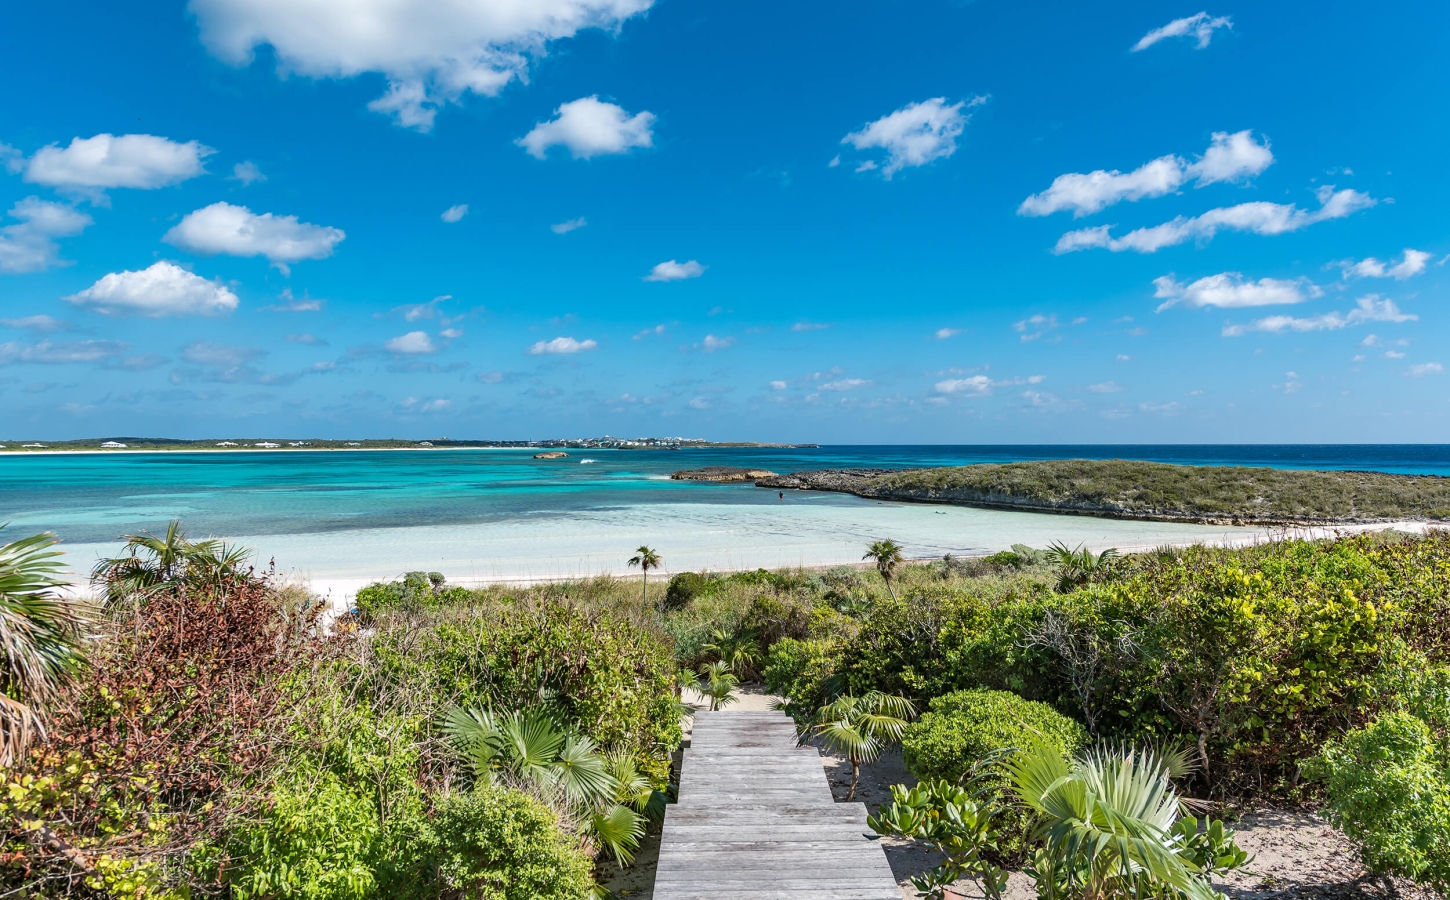 Ocean views from The Abaco Club symbolizing the luxury of club lifestyle and coastal living